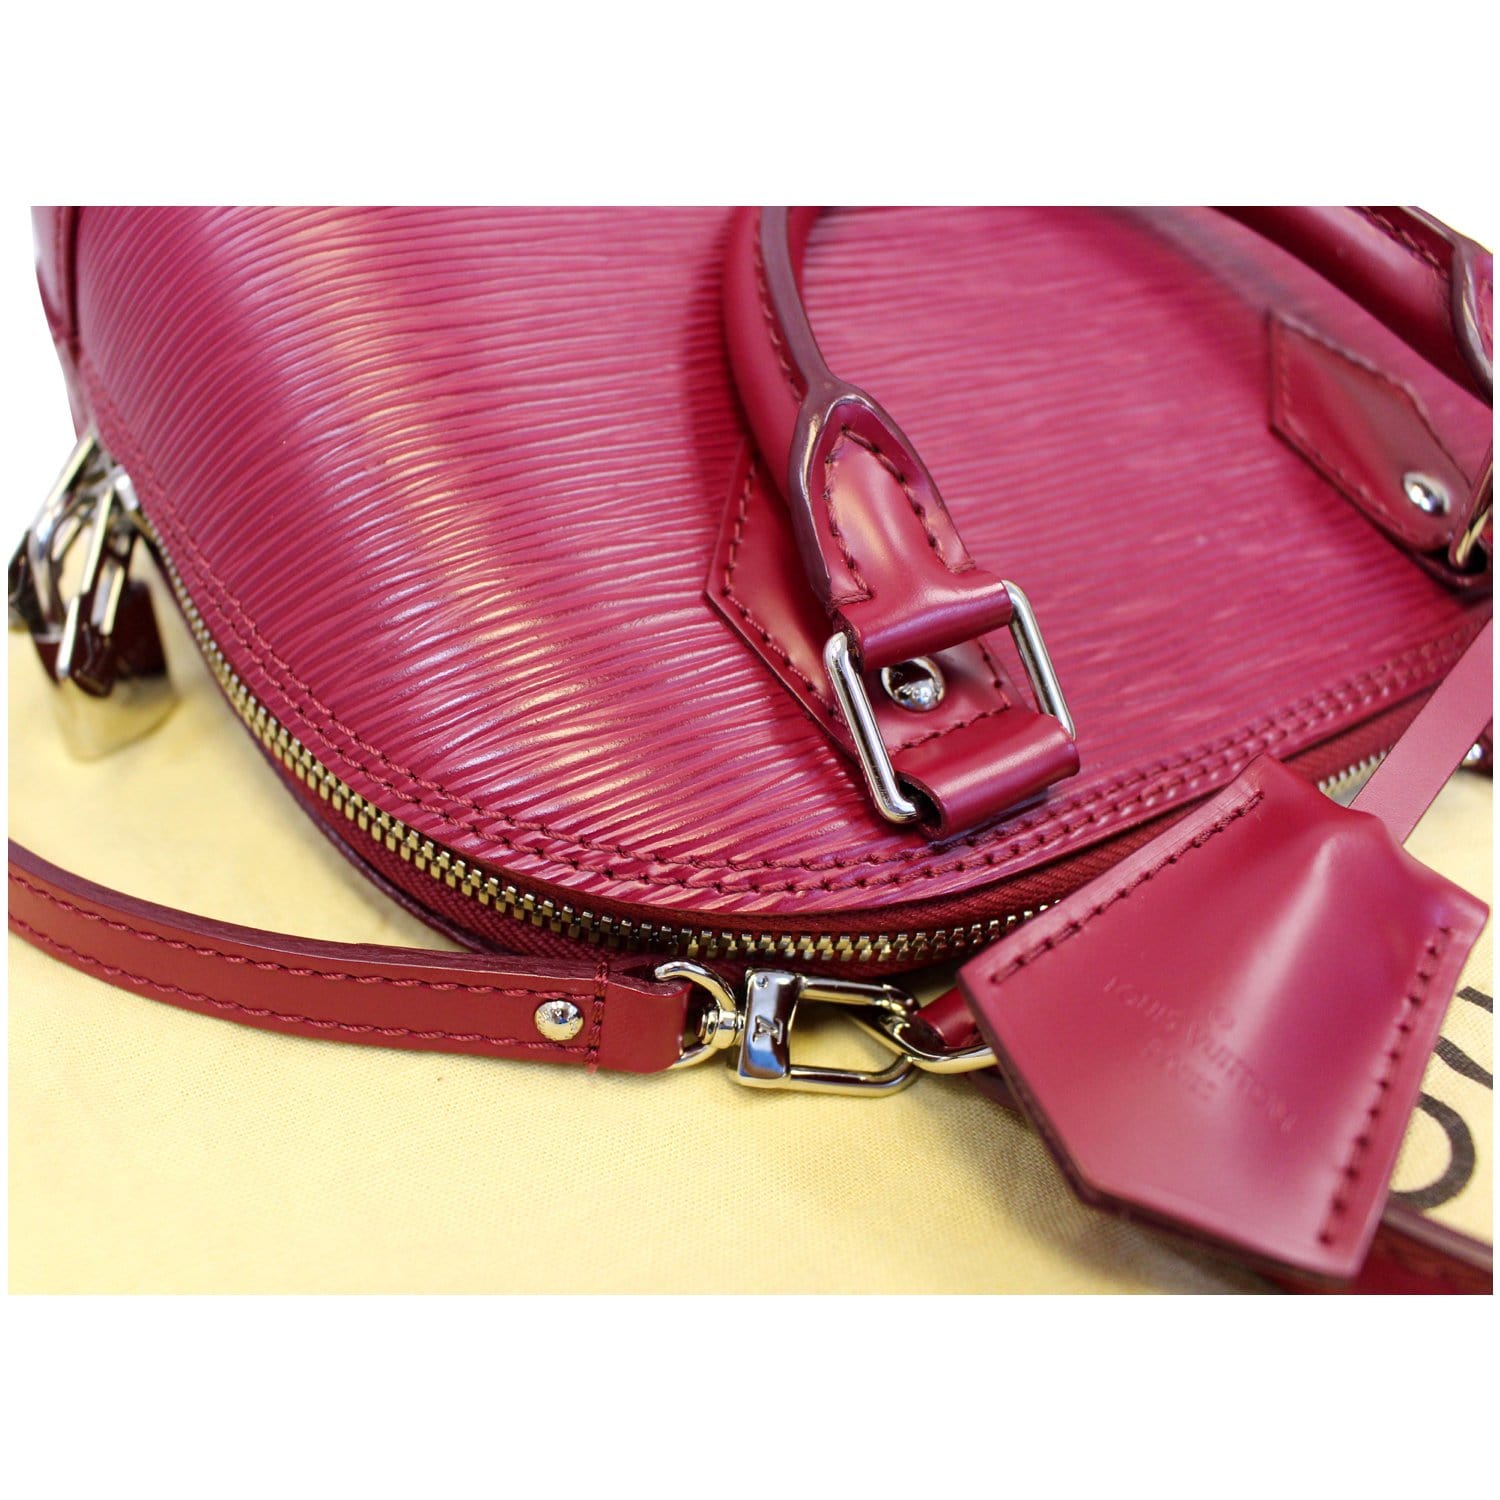 Louis Vuitton Alma pm Epi leather in Fuschia review and what fits